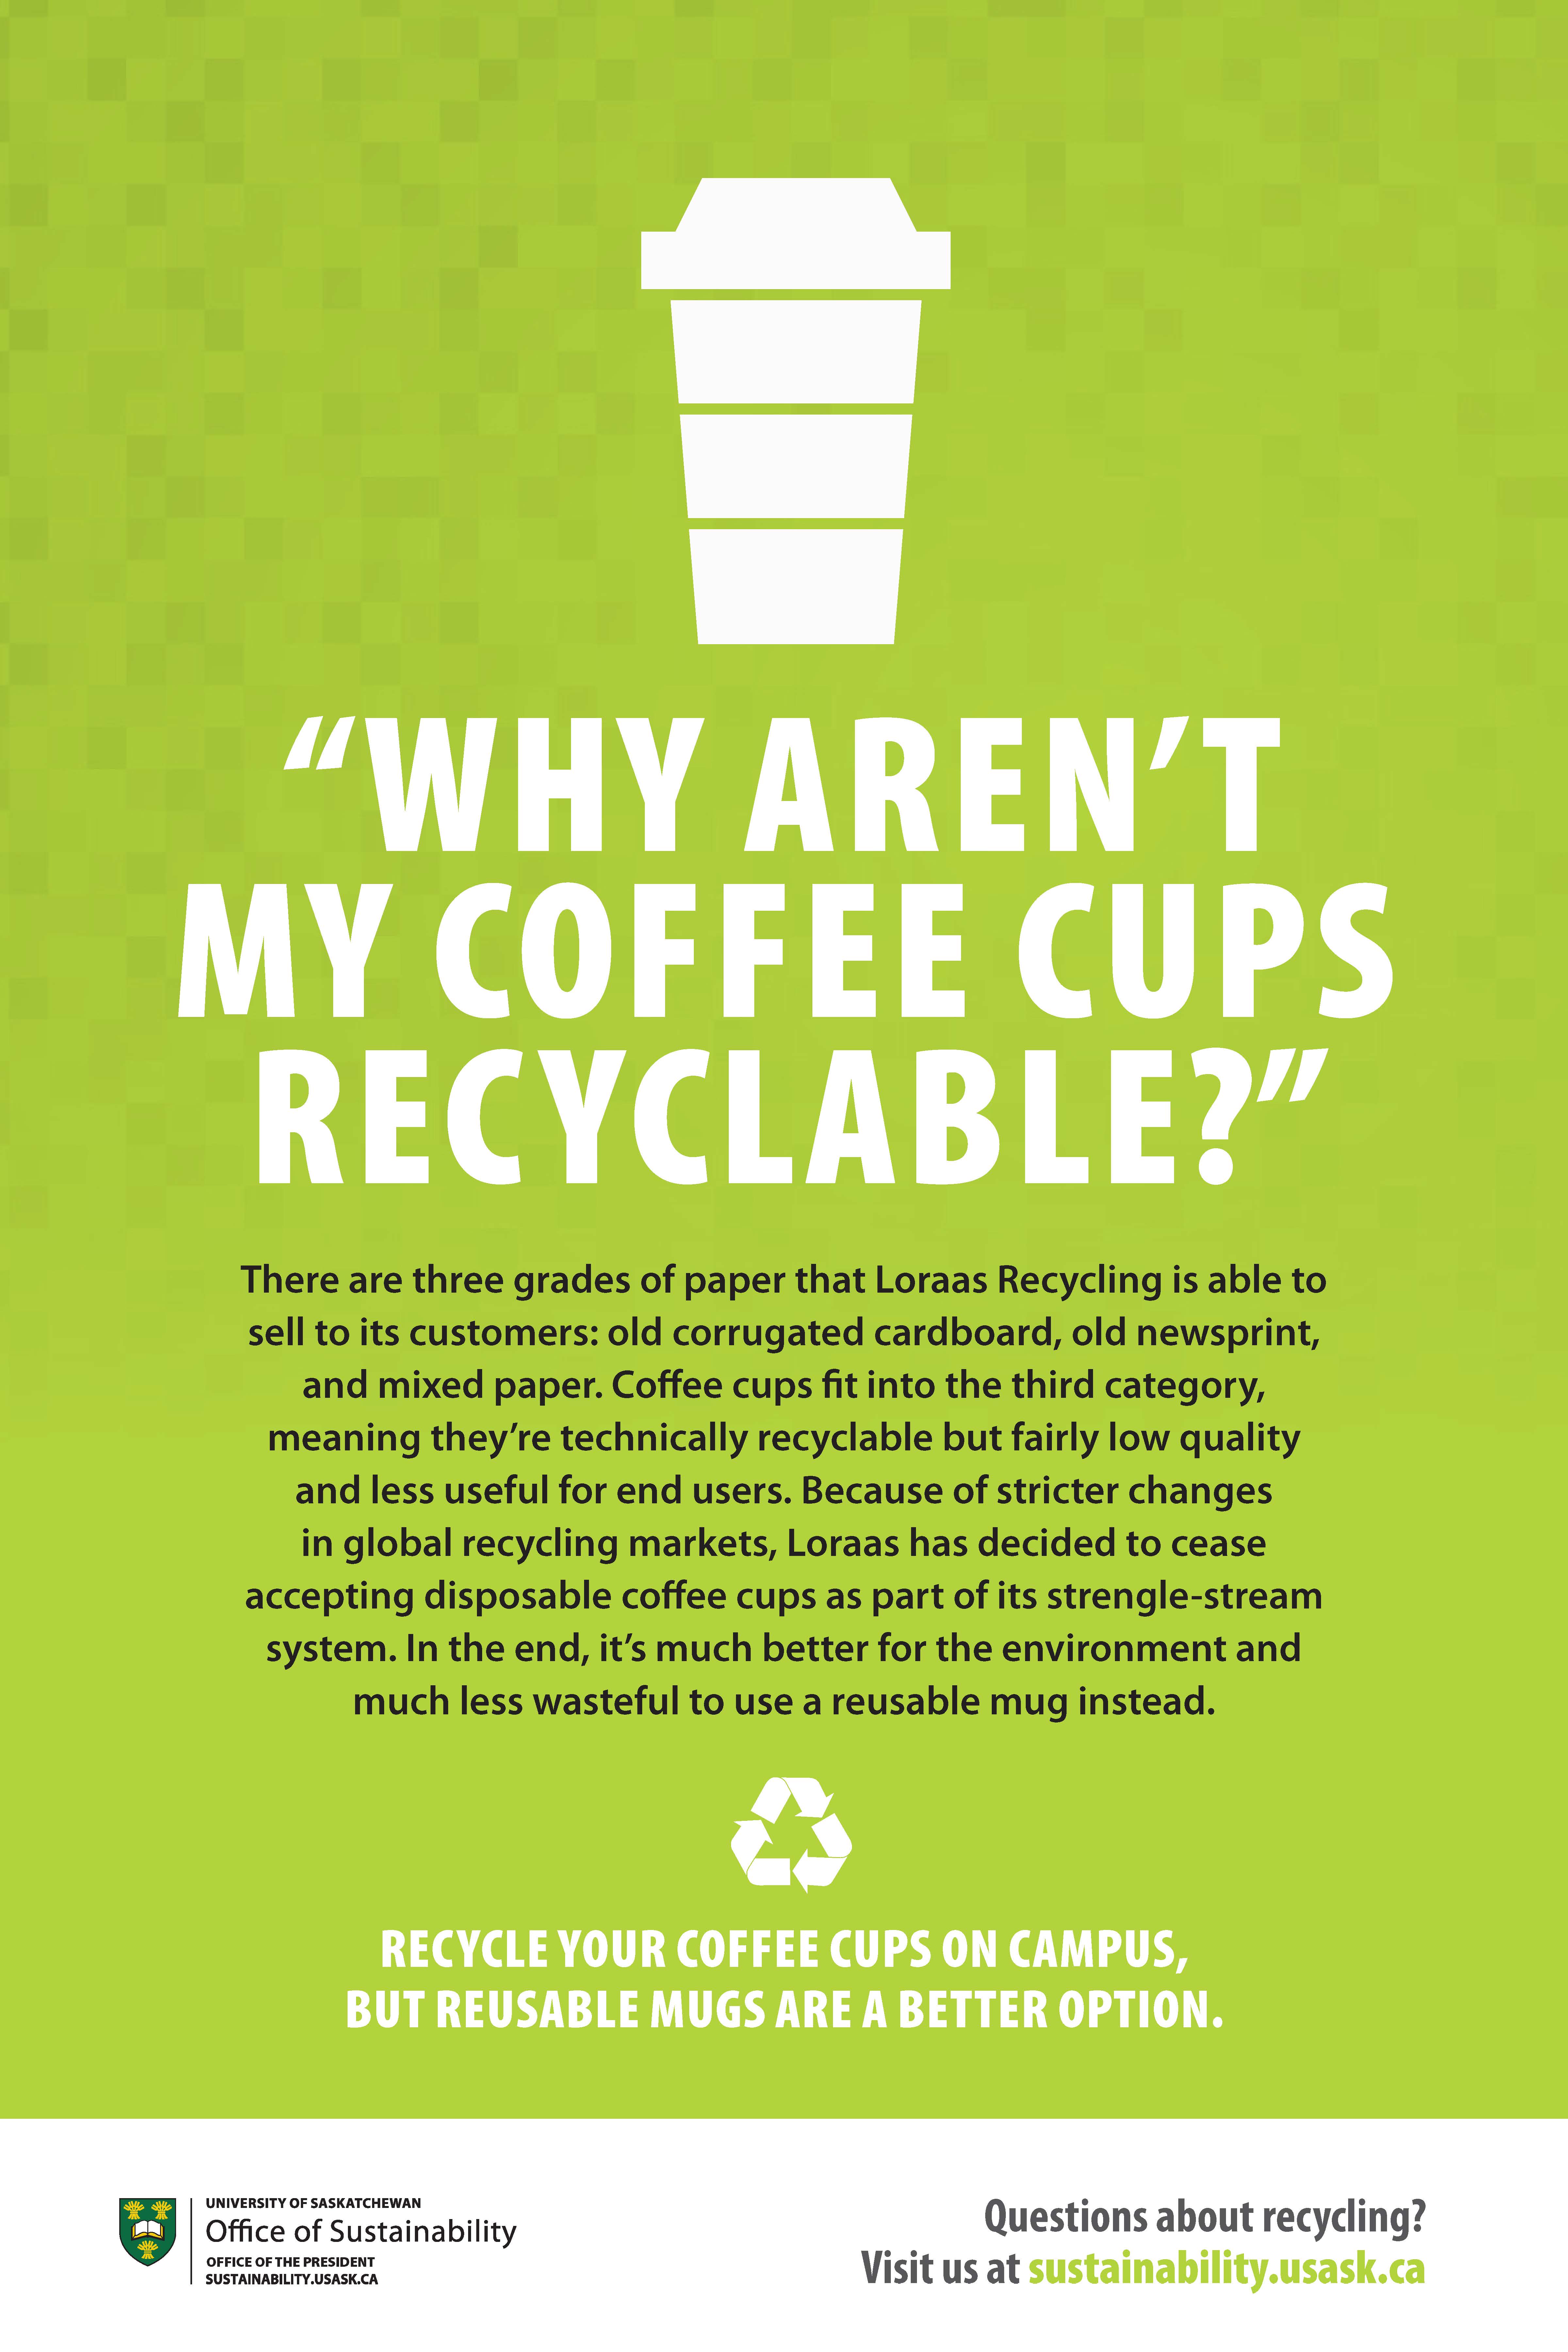 One of the Office of Sustainability's educational recycling posters depicting proper coffee cup recycling.